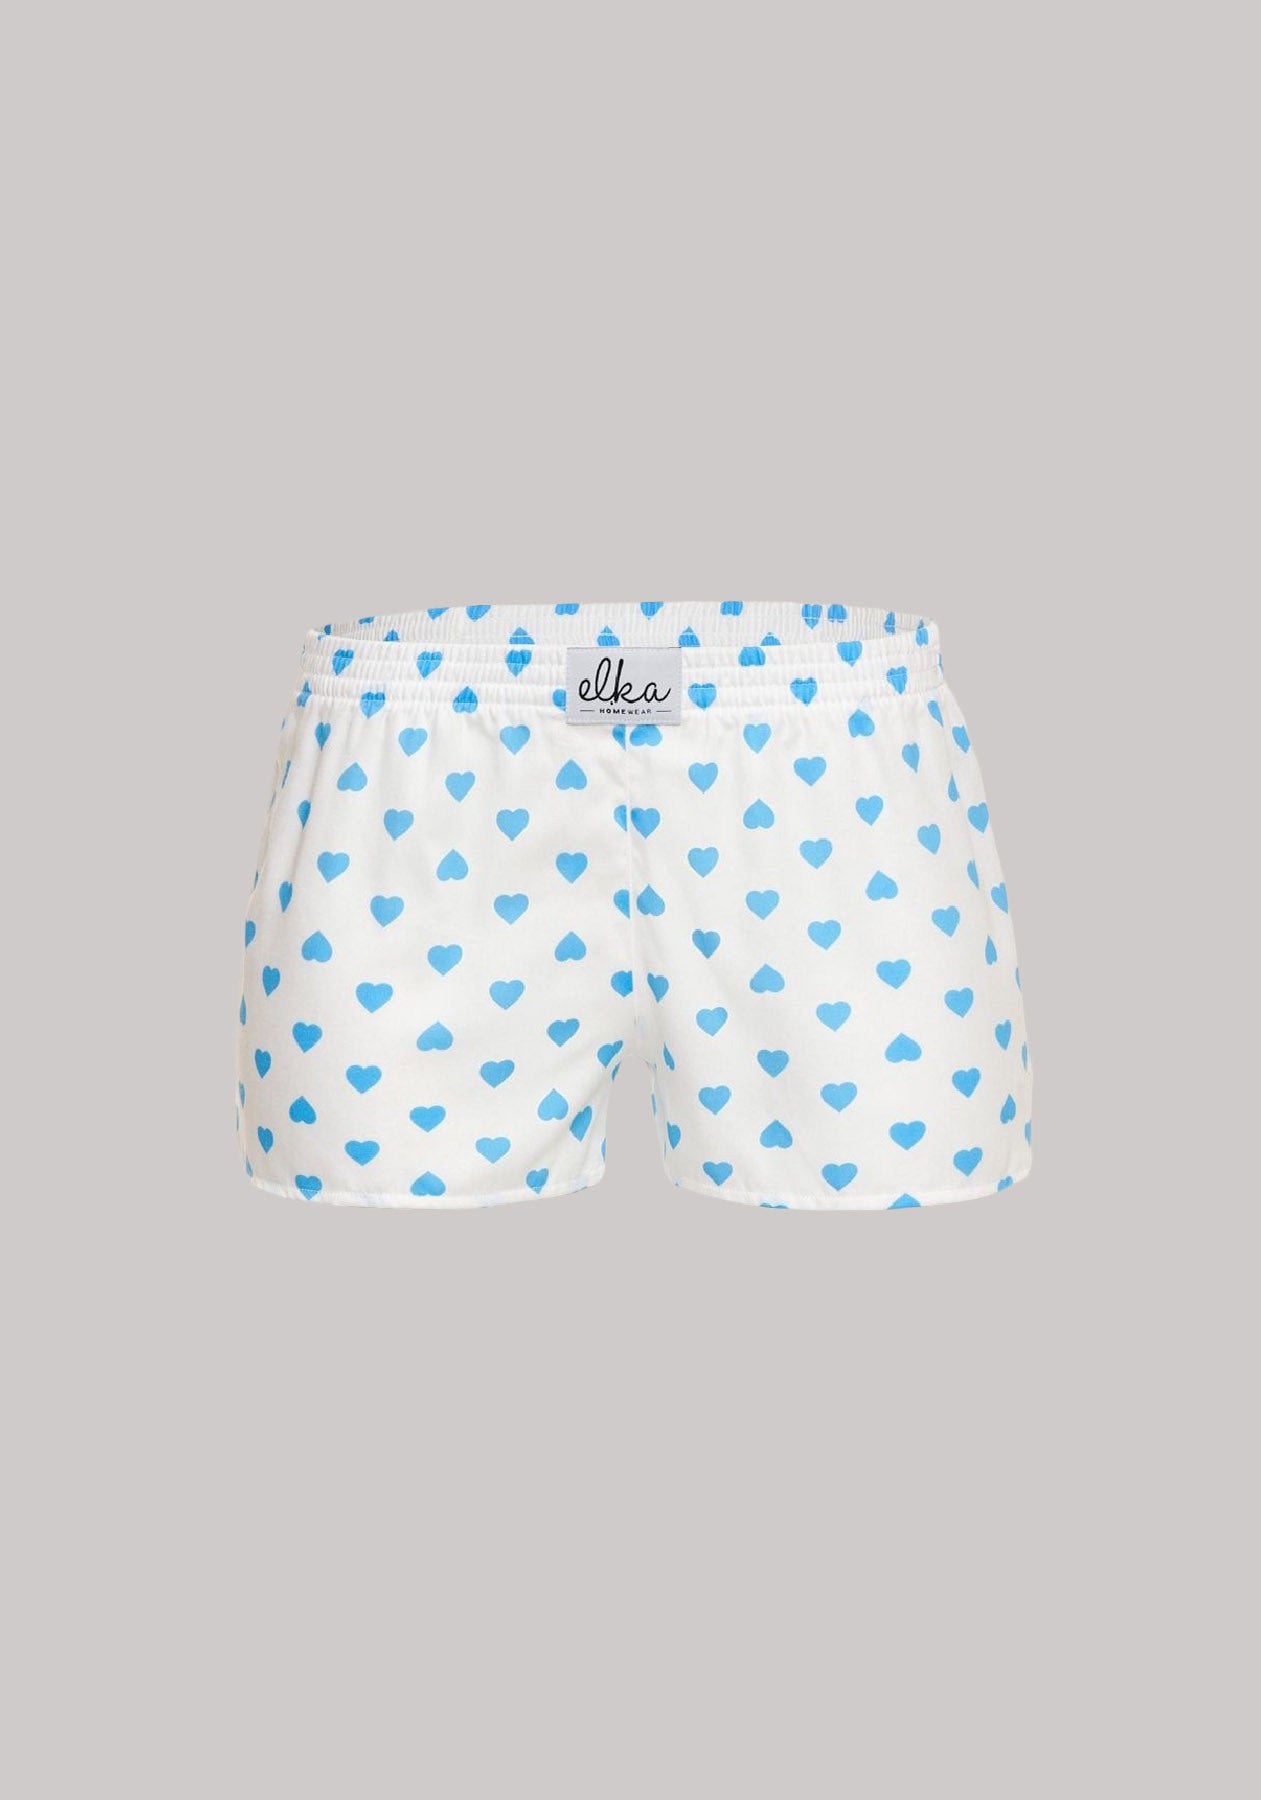 Women's shorts White with hearts